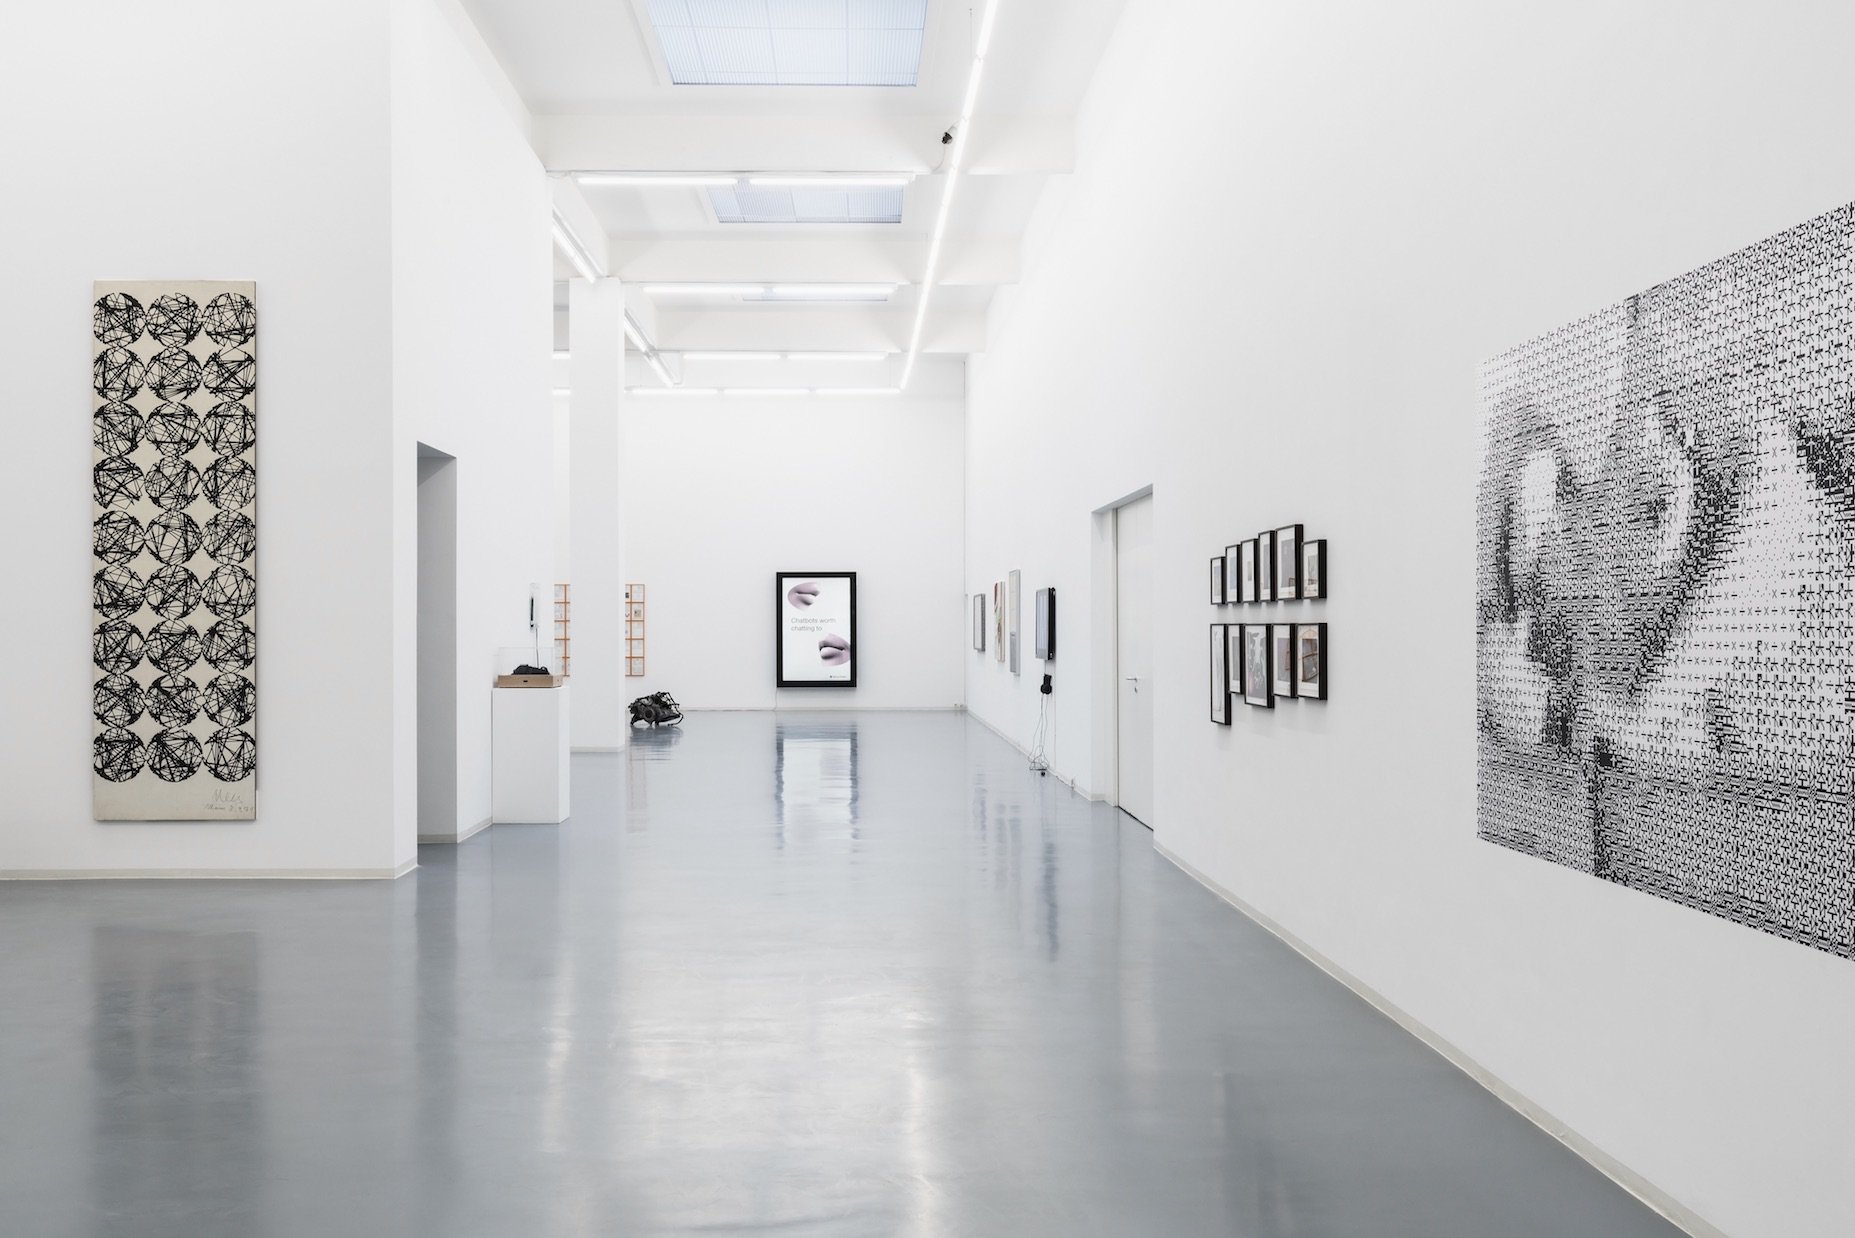 The Policeman’s Beard is Half Constructed: Art in the Age of Artificial Intelligence, Installation view, 2017, Bonner Kunstverein. Photo: Anne Pöhlmann